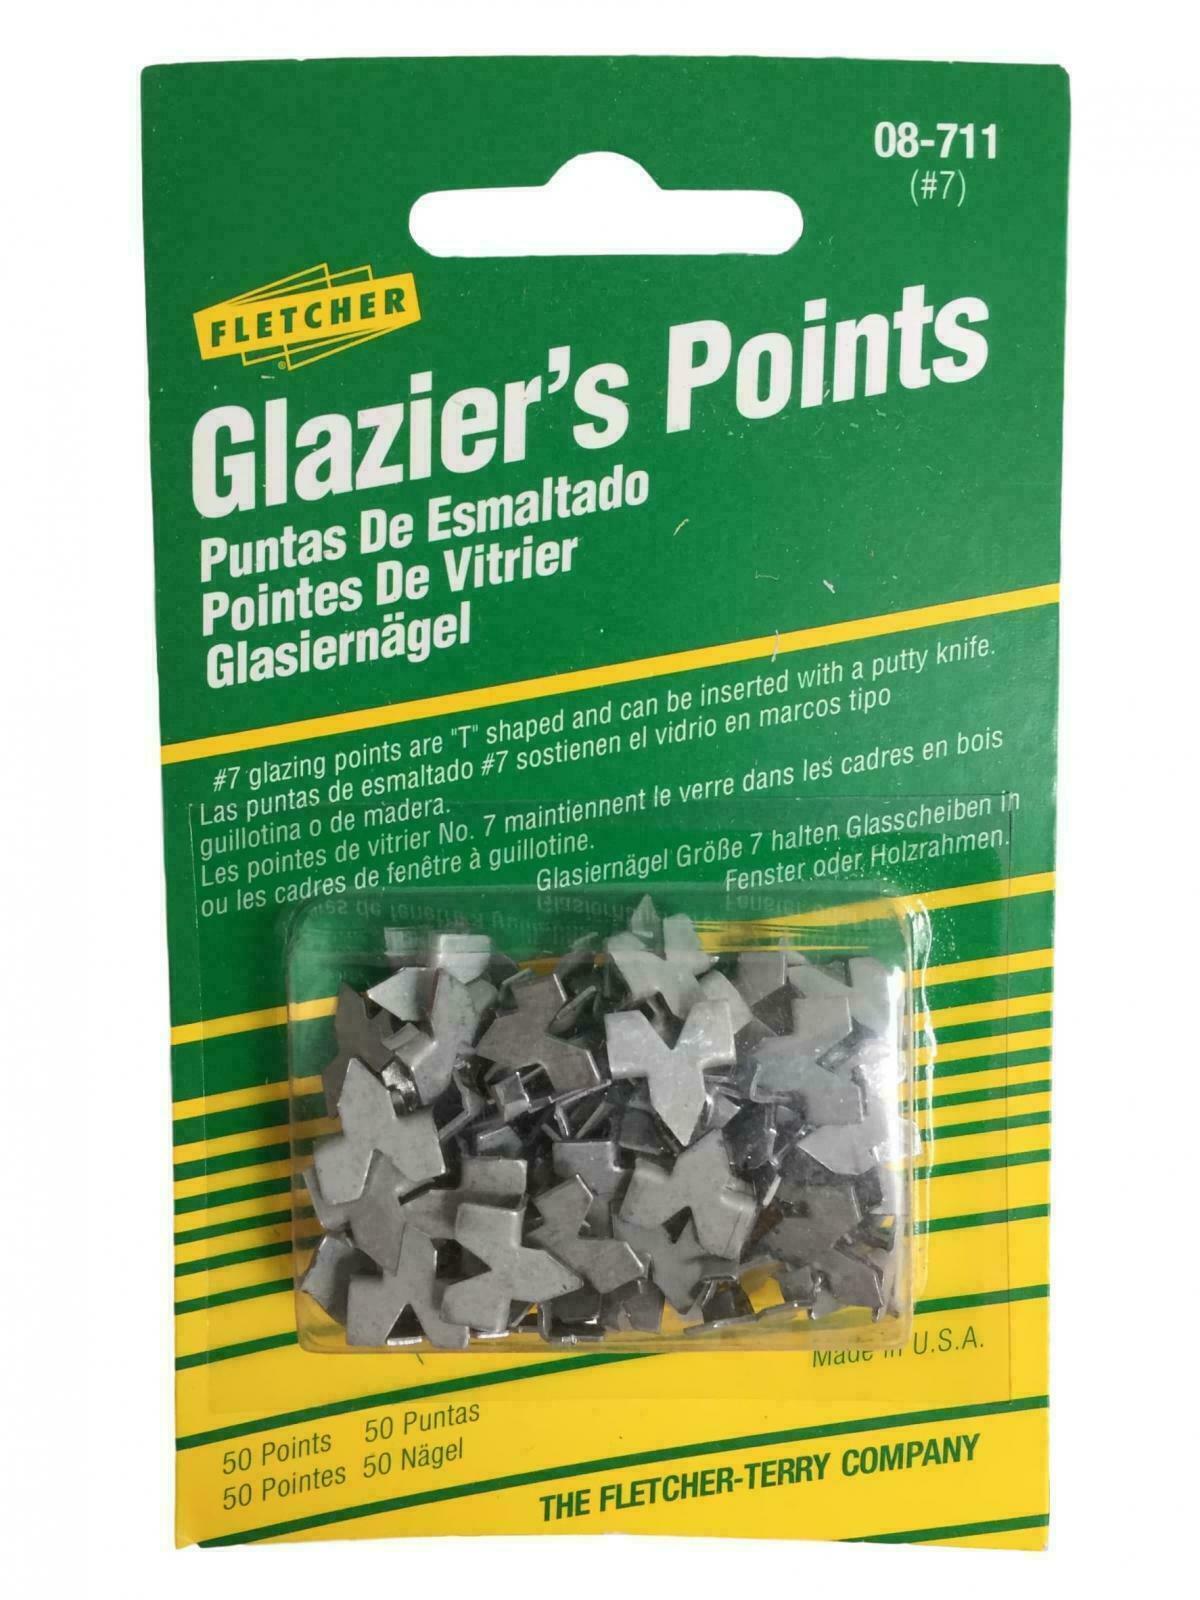 Picture Framing & Glazing  Fletcher MultiPoints and Drivers